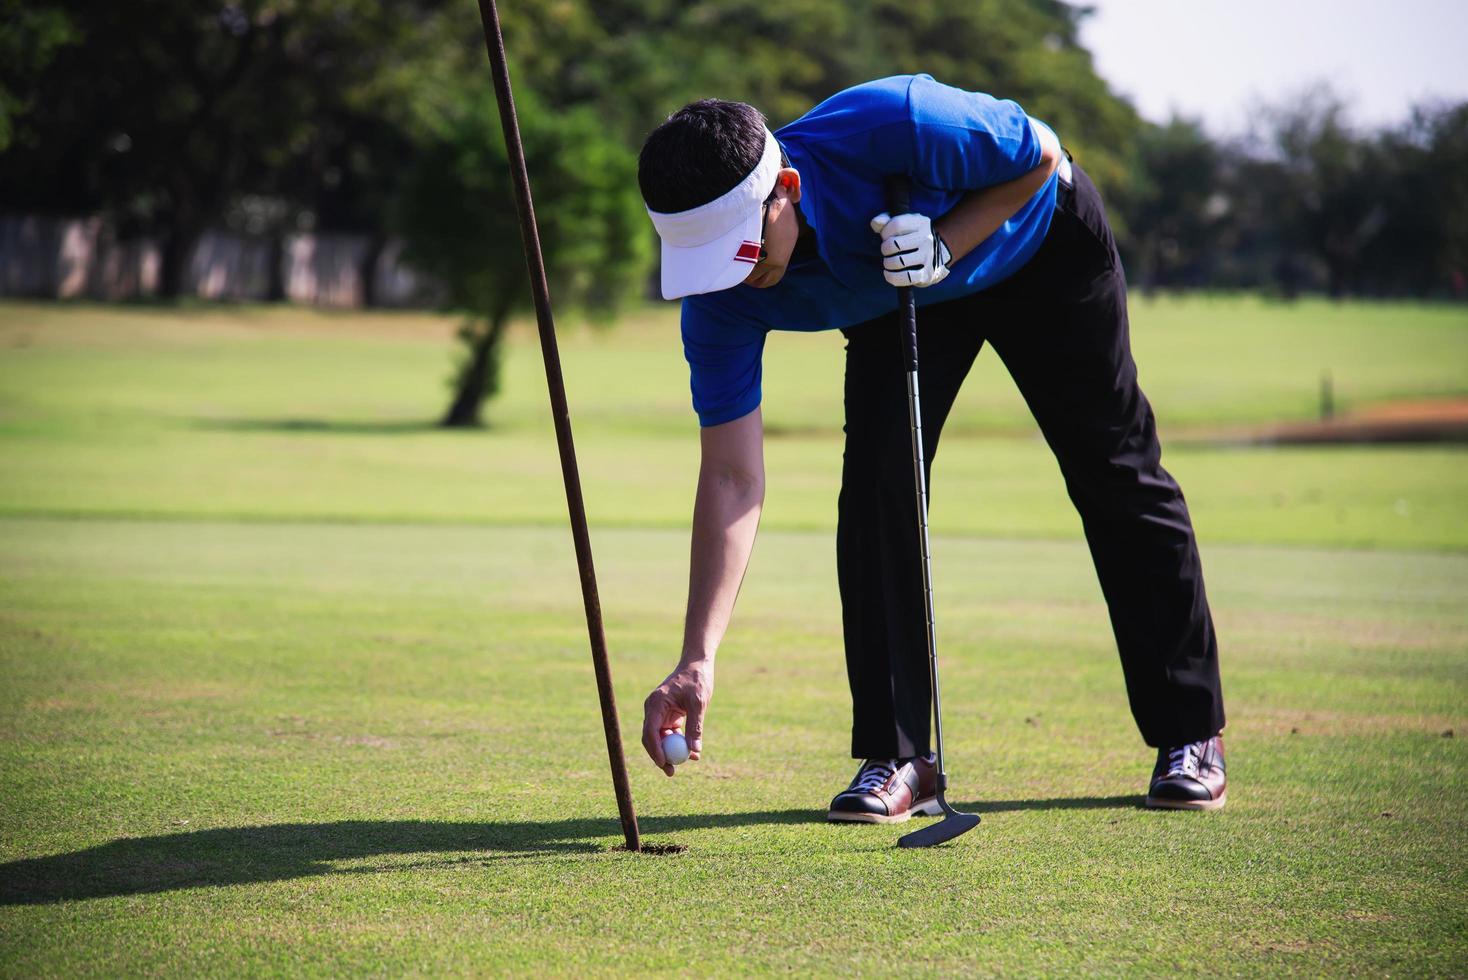 Man play outdoor golf sport activity - people in golf sport concept photo